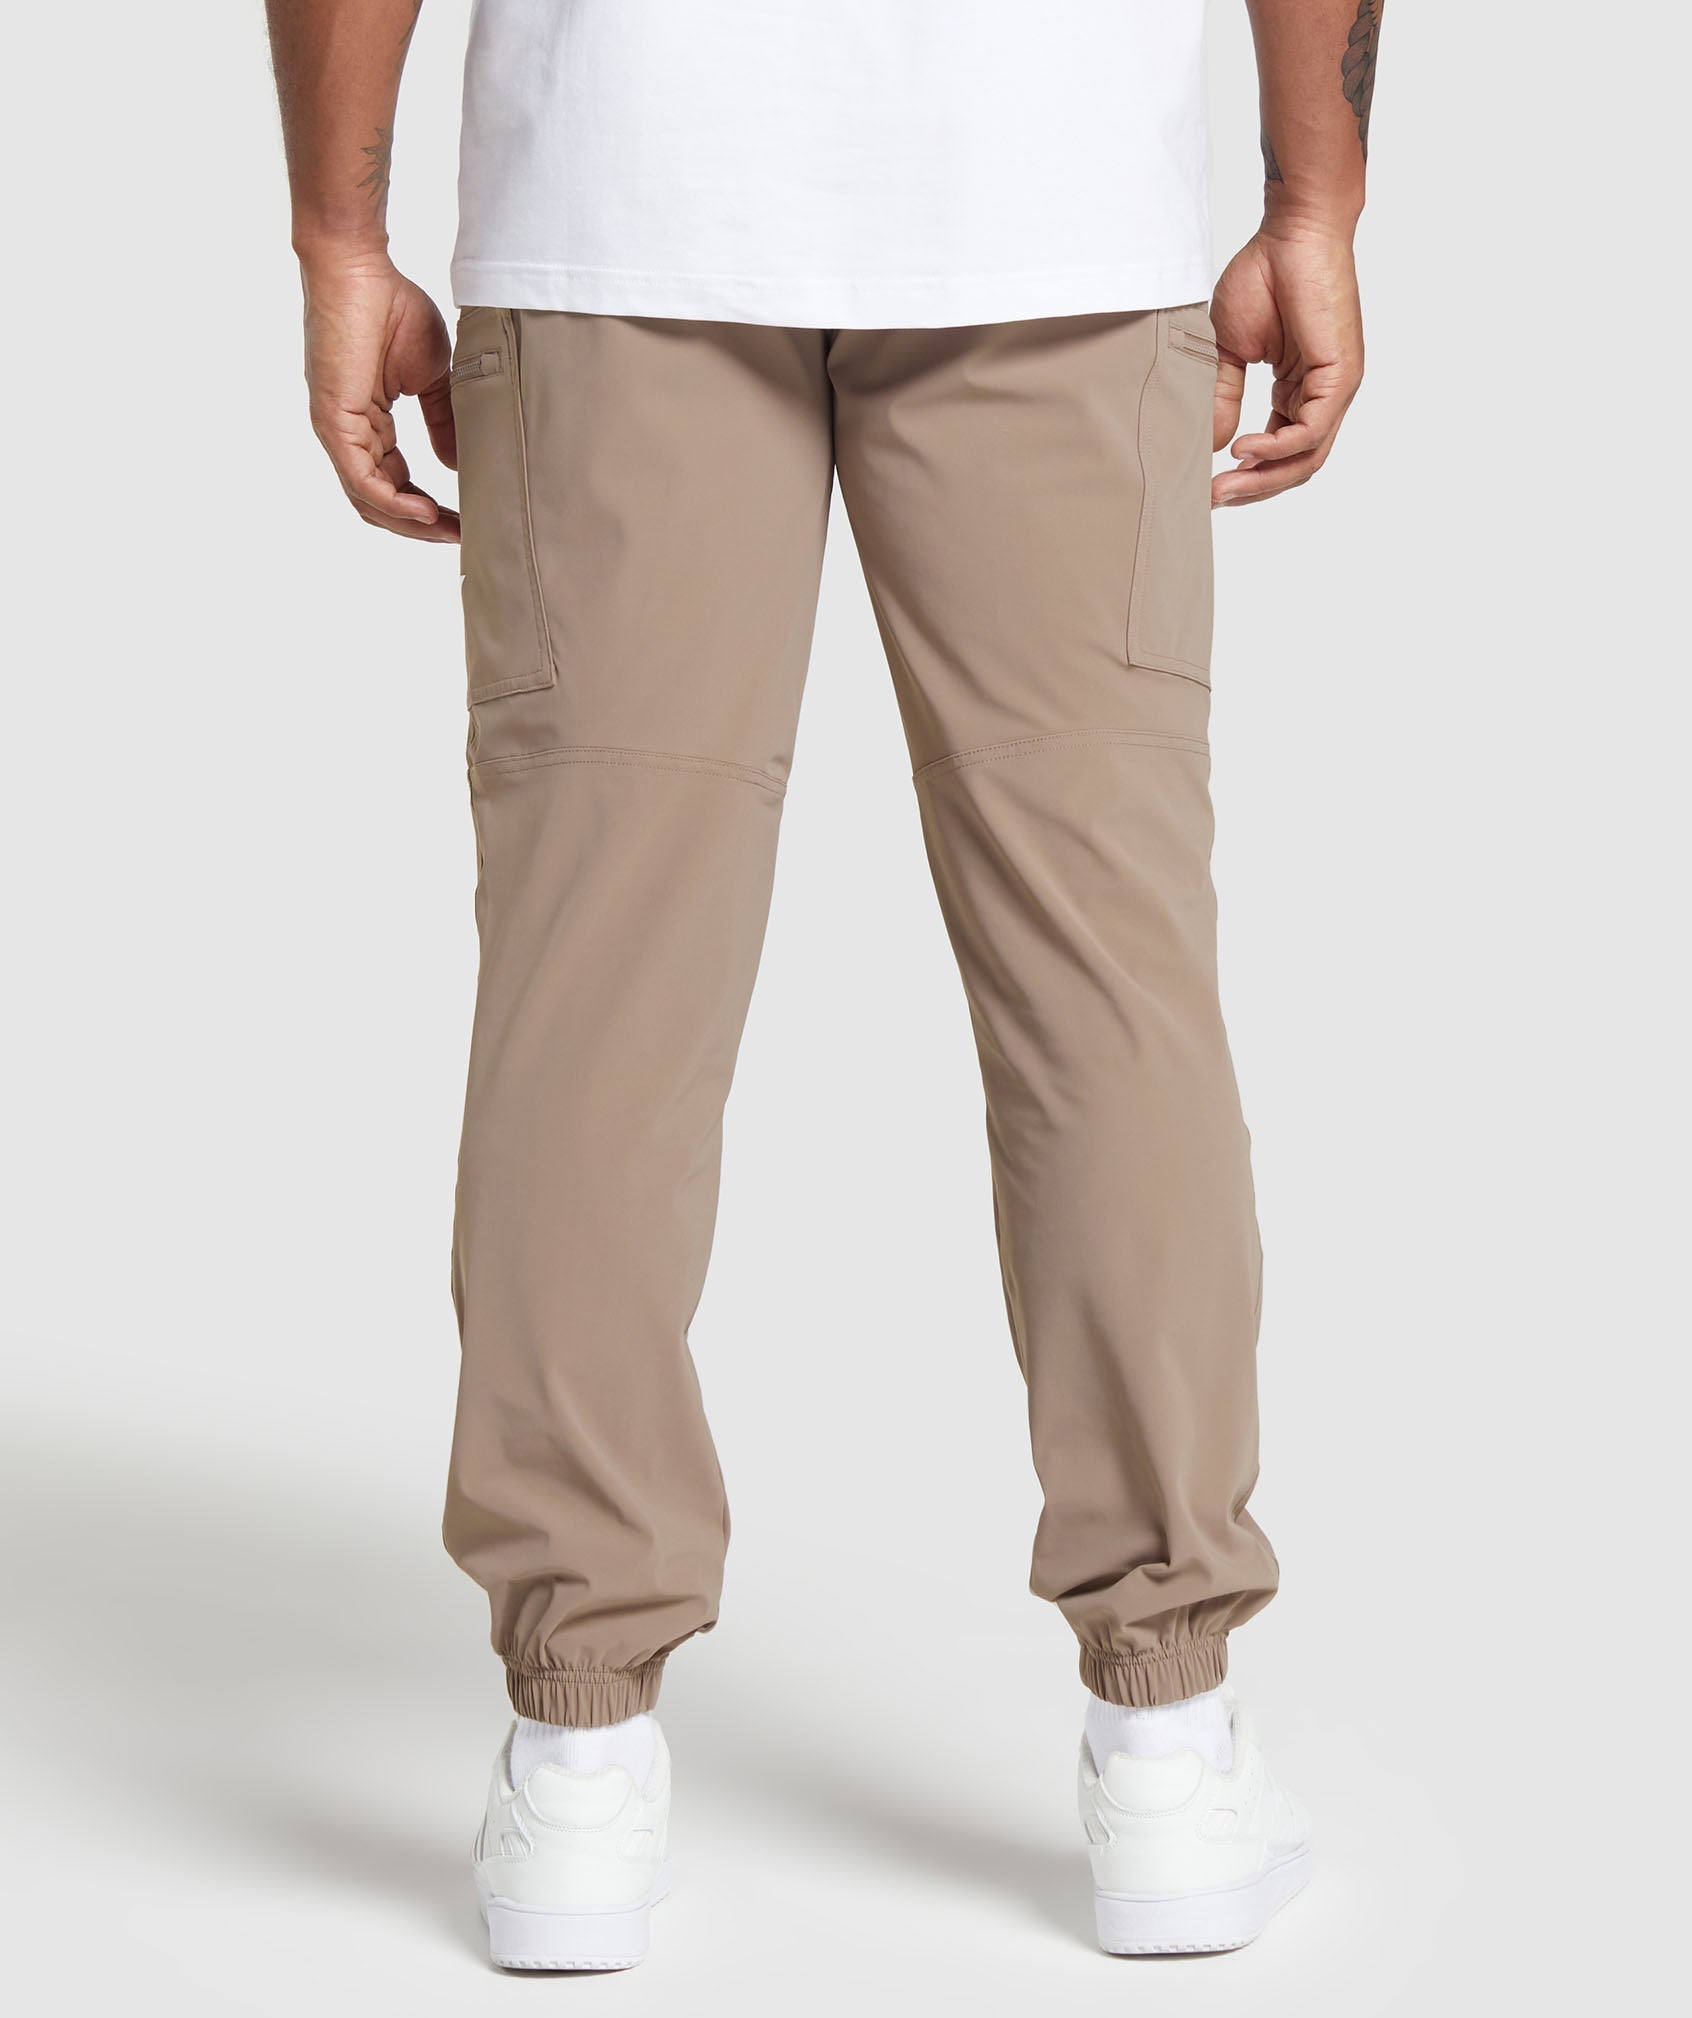 Rest Day Cargo Pants in Mocha Mauve - view 3